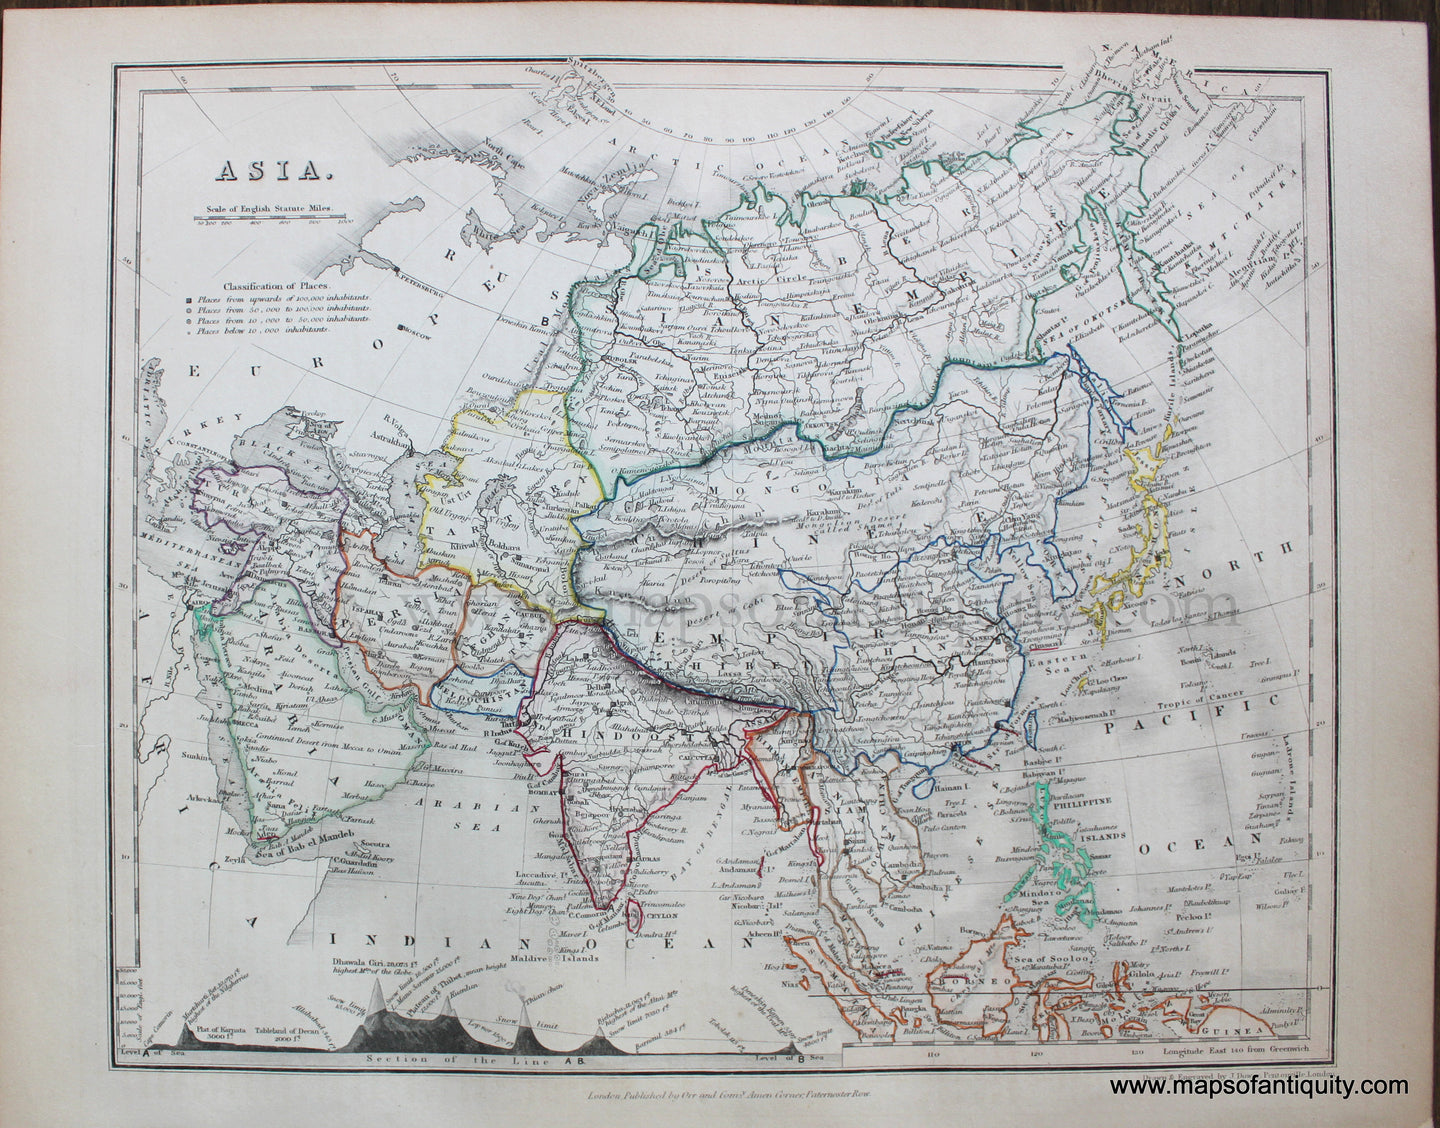 Genuine-Antique-Map-Asia-Asia--1850-Petermann-/-Orr-/-Dower-Maps-Of-Antiquity-1800s-19th-century